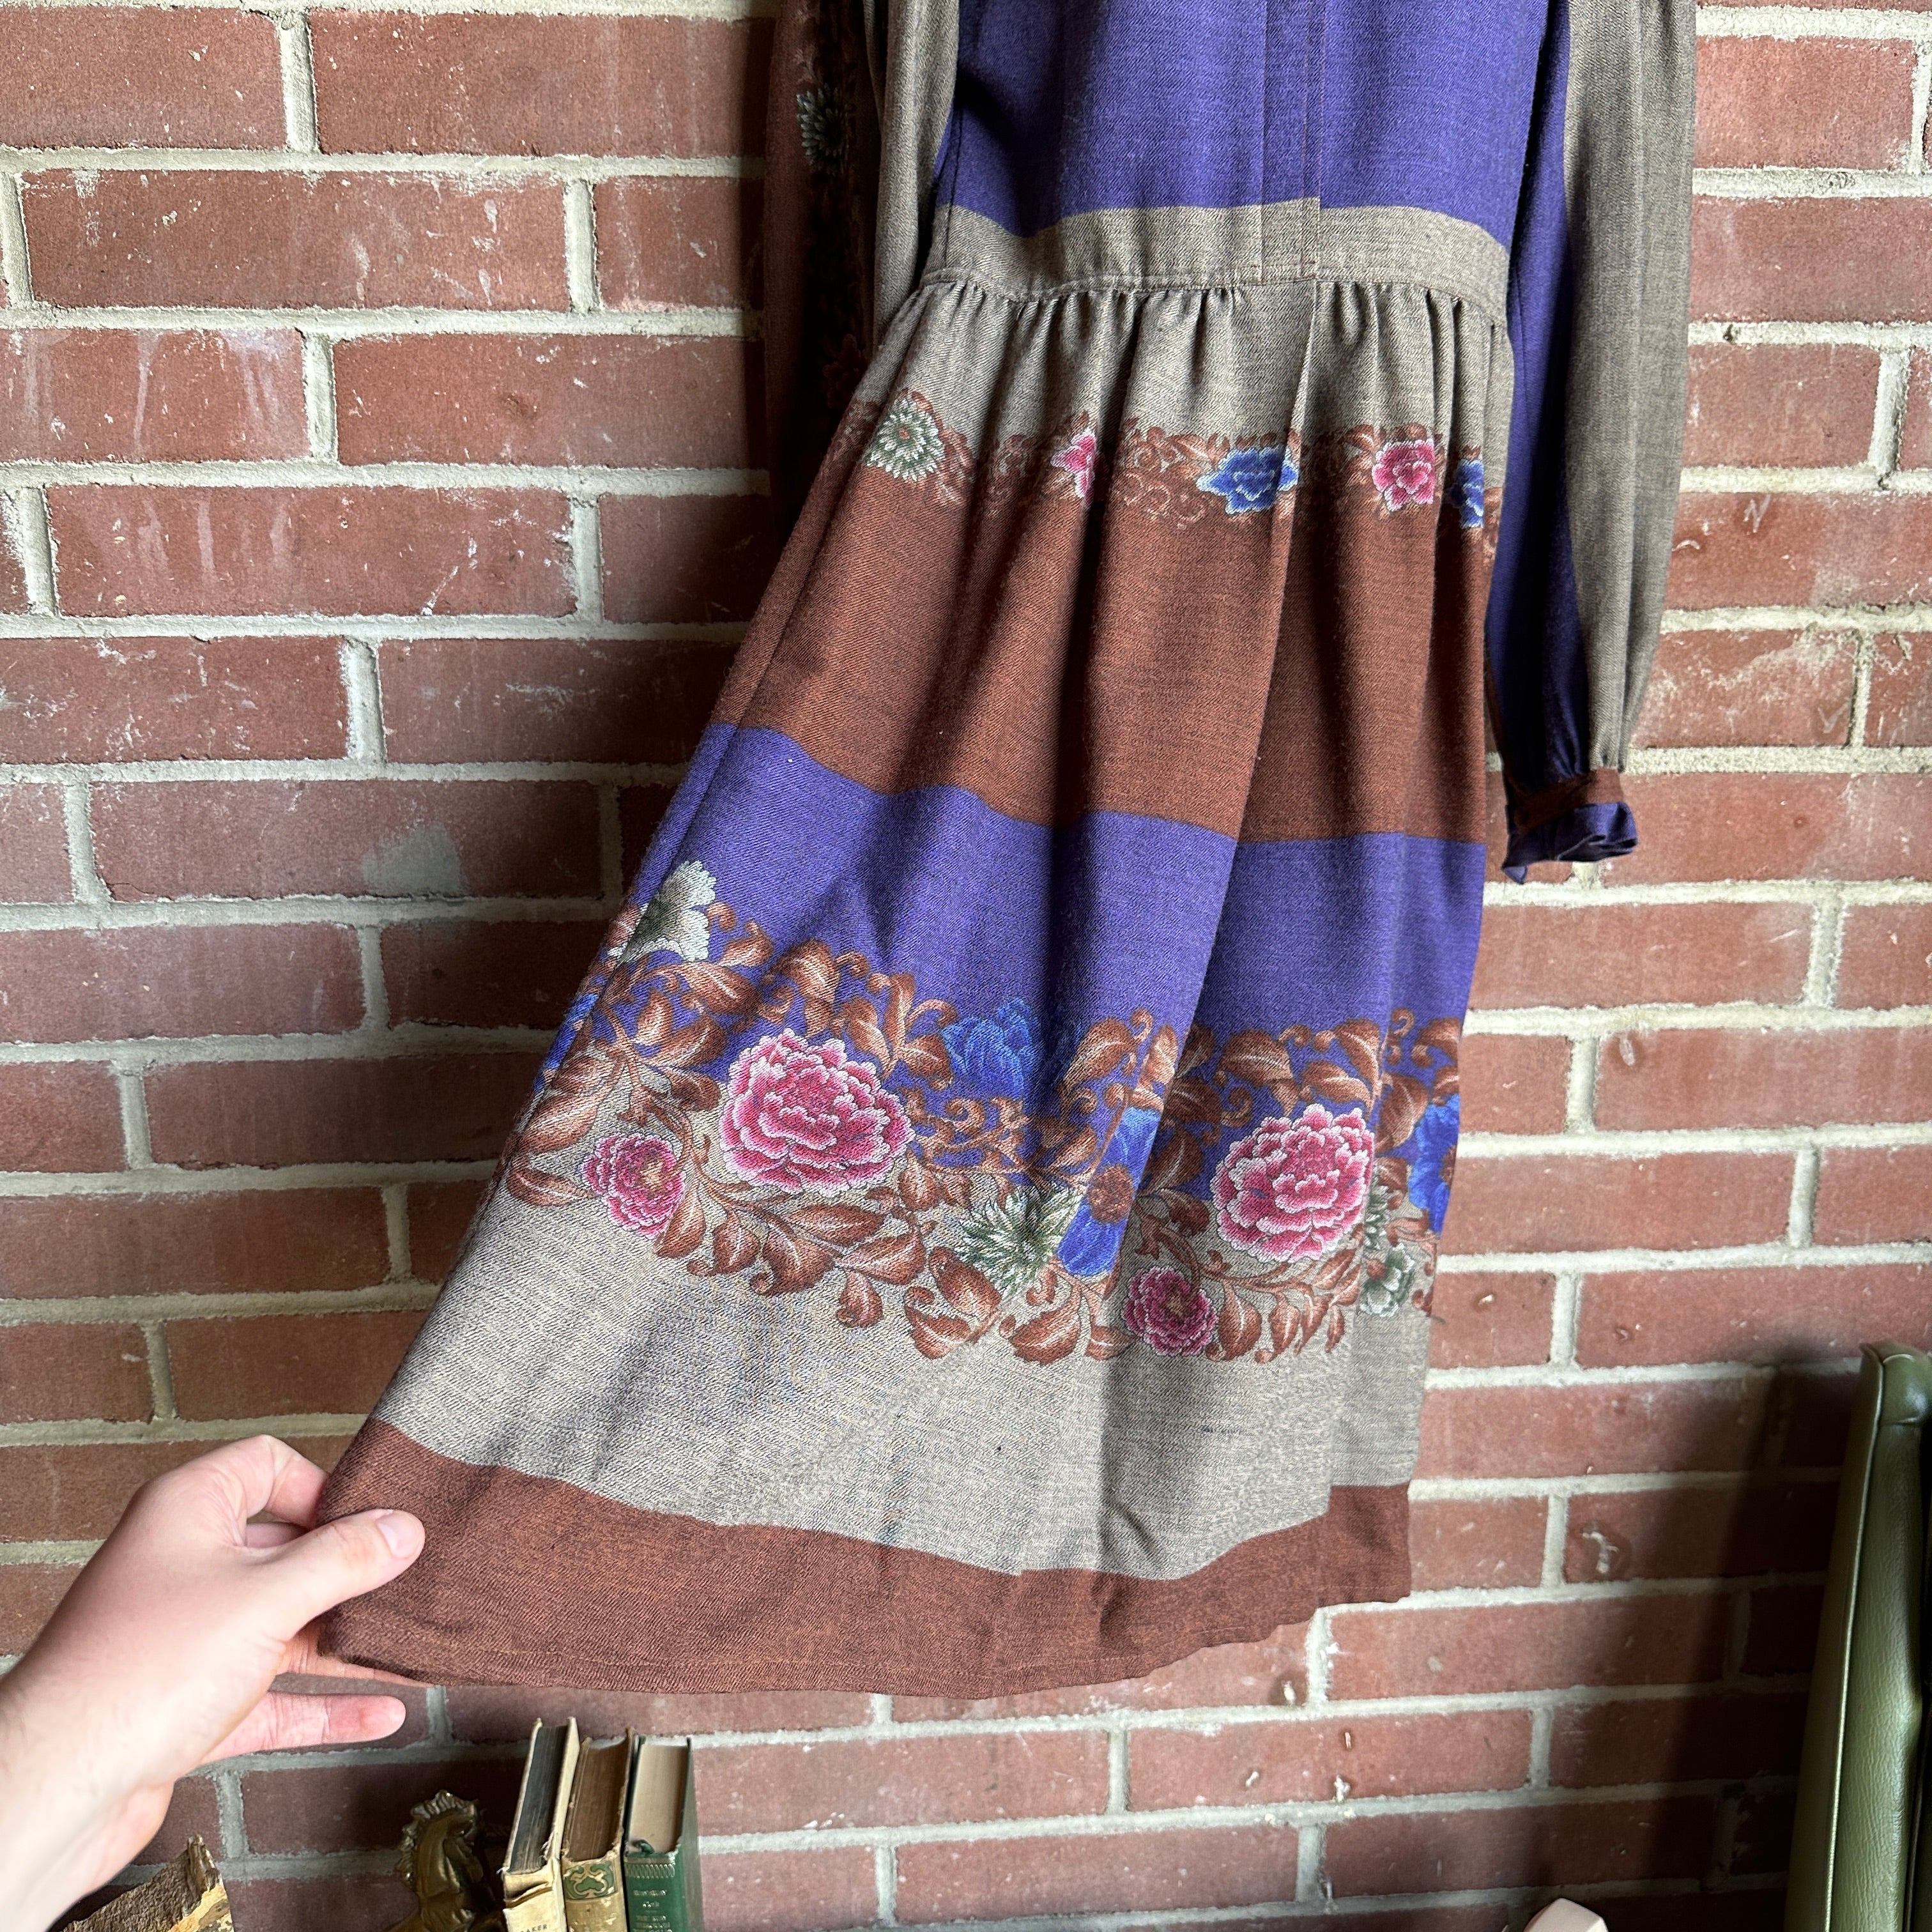 90s/2000s Purple and Floral “Christyne Forti” Dress